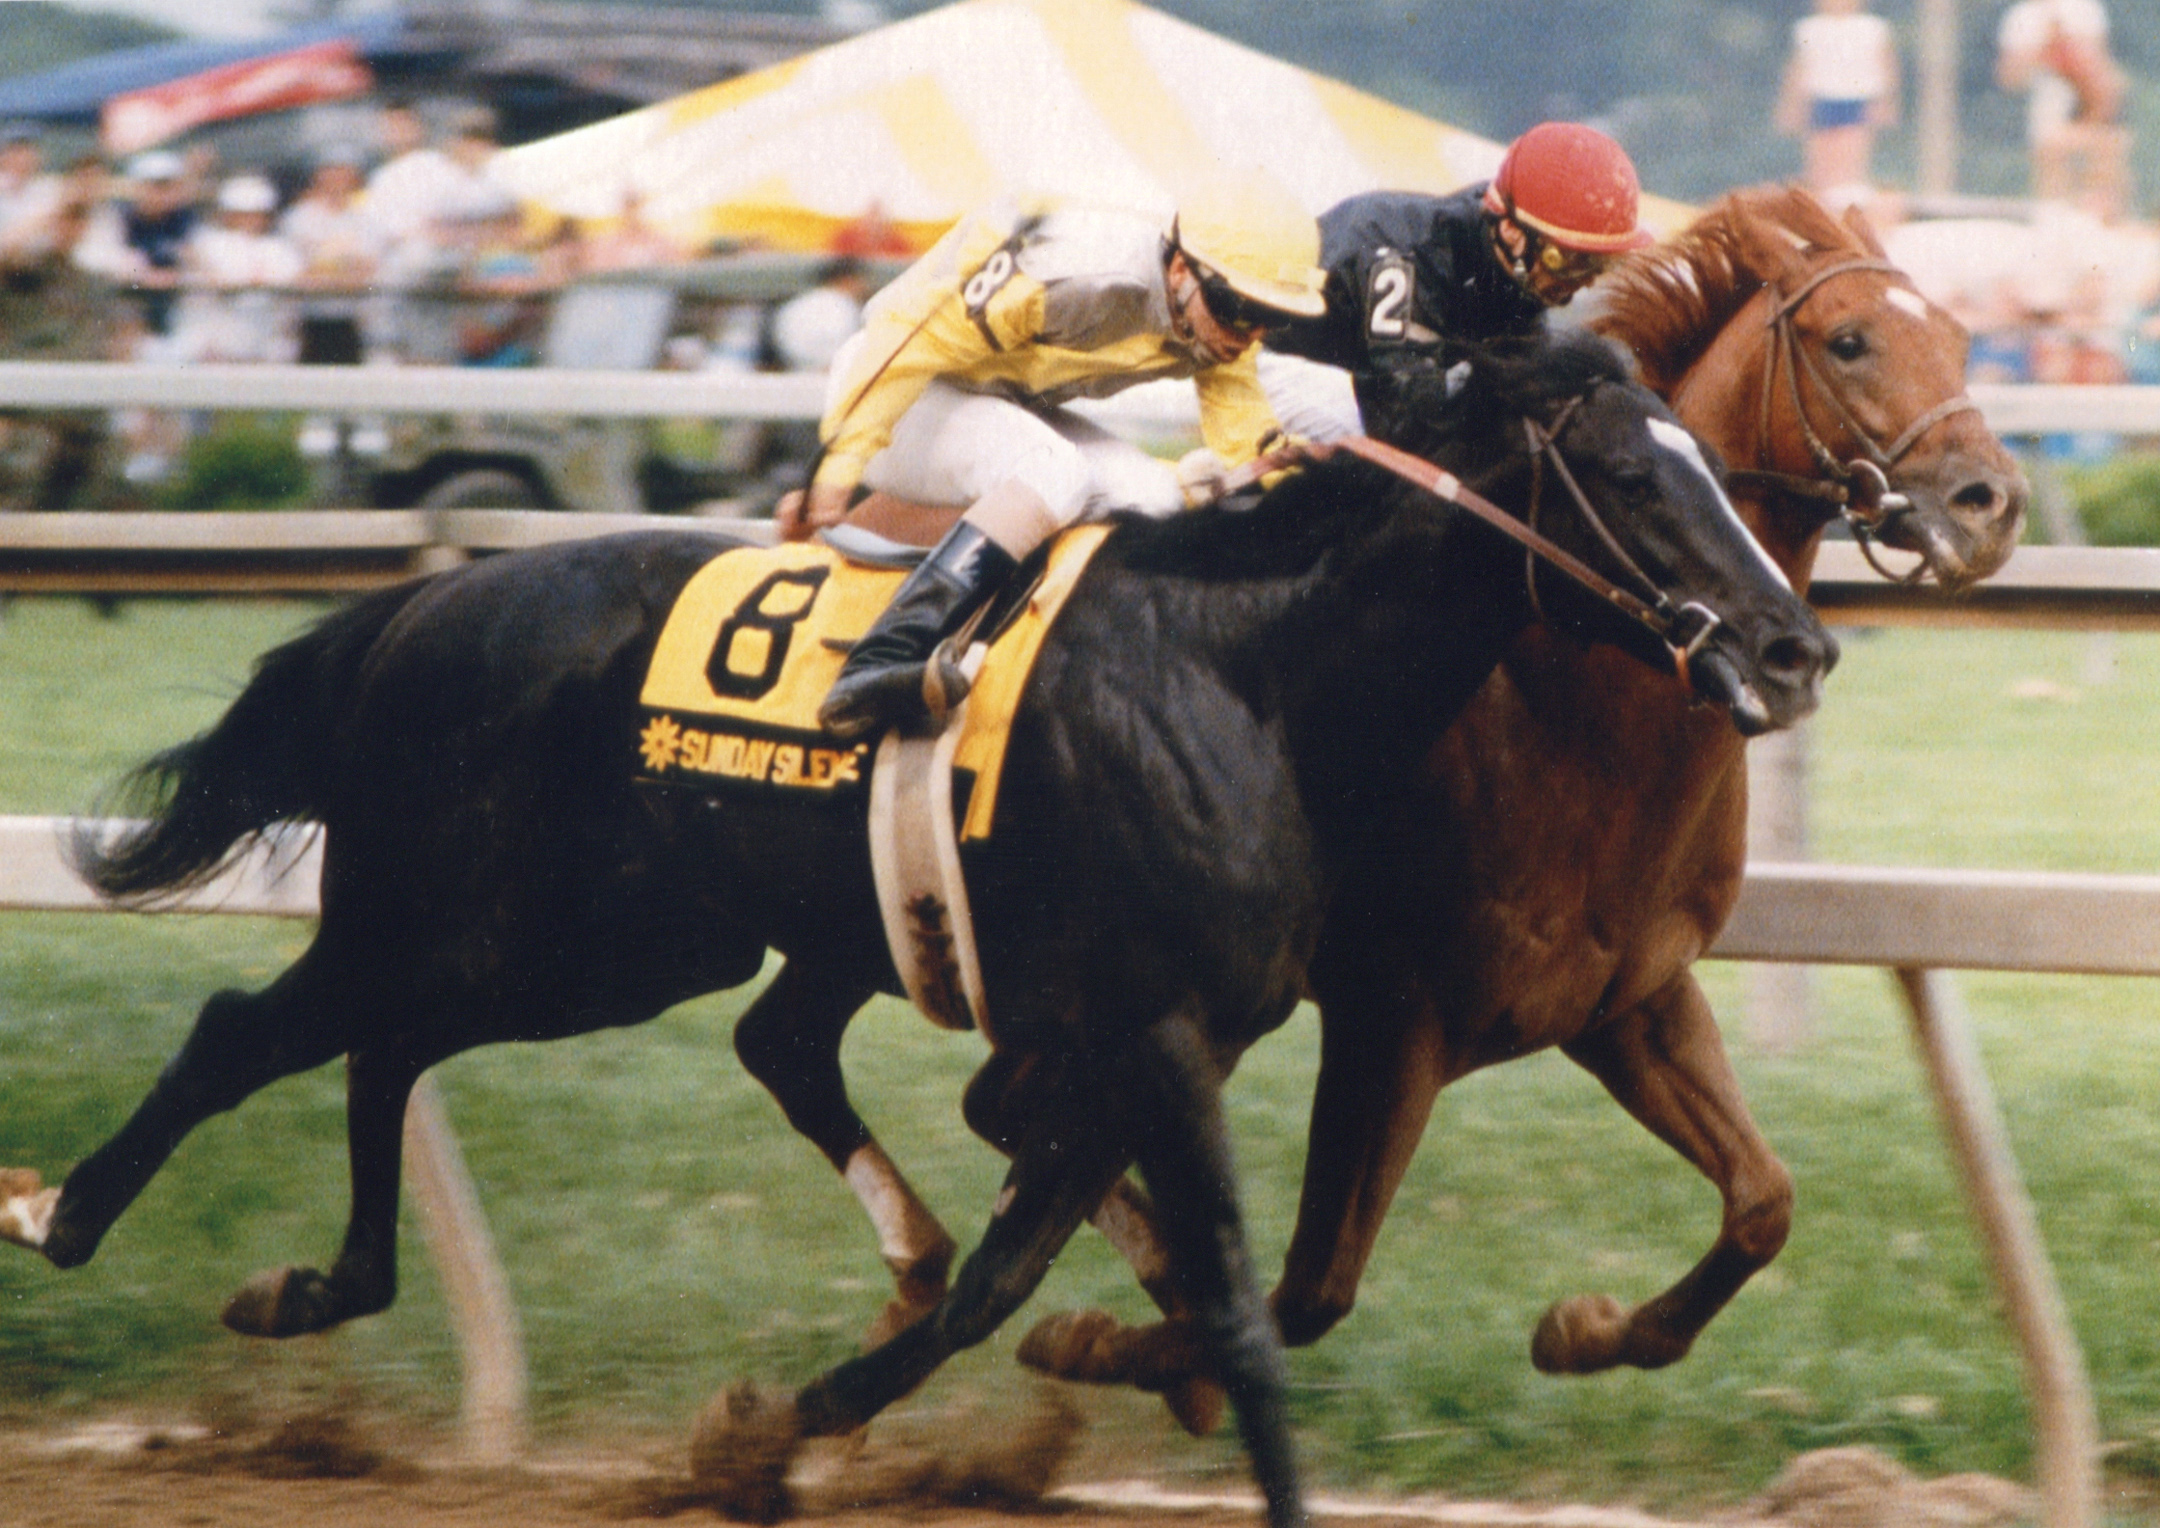 Sunday Silence (Patrick Valenzuela up) edges out fellow Hall of Famer Easy Goer (Pat Day up) in the 1989 Preakness Stakes (Mike Pender/Museum Collection)